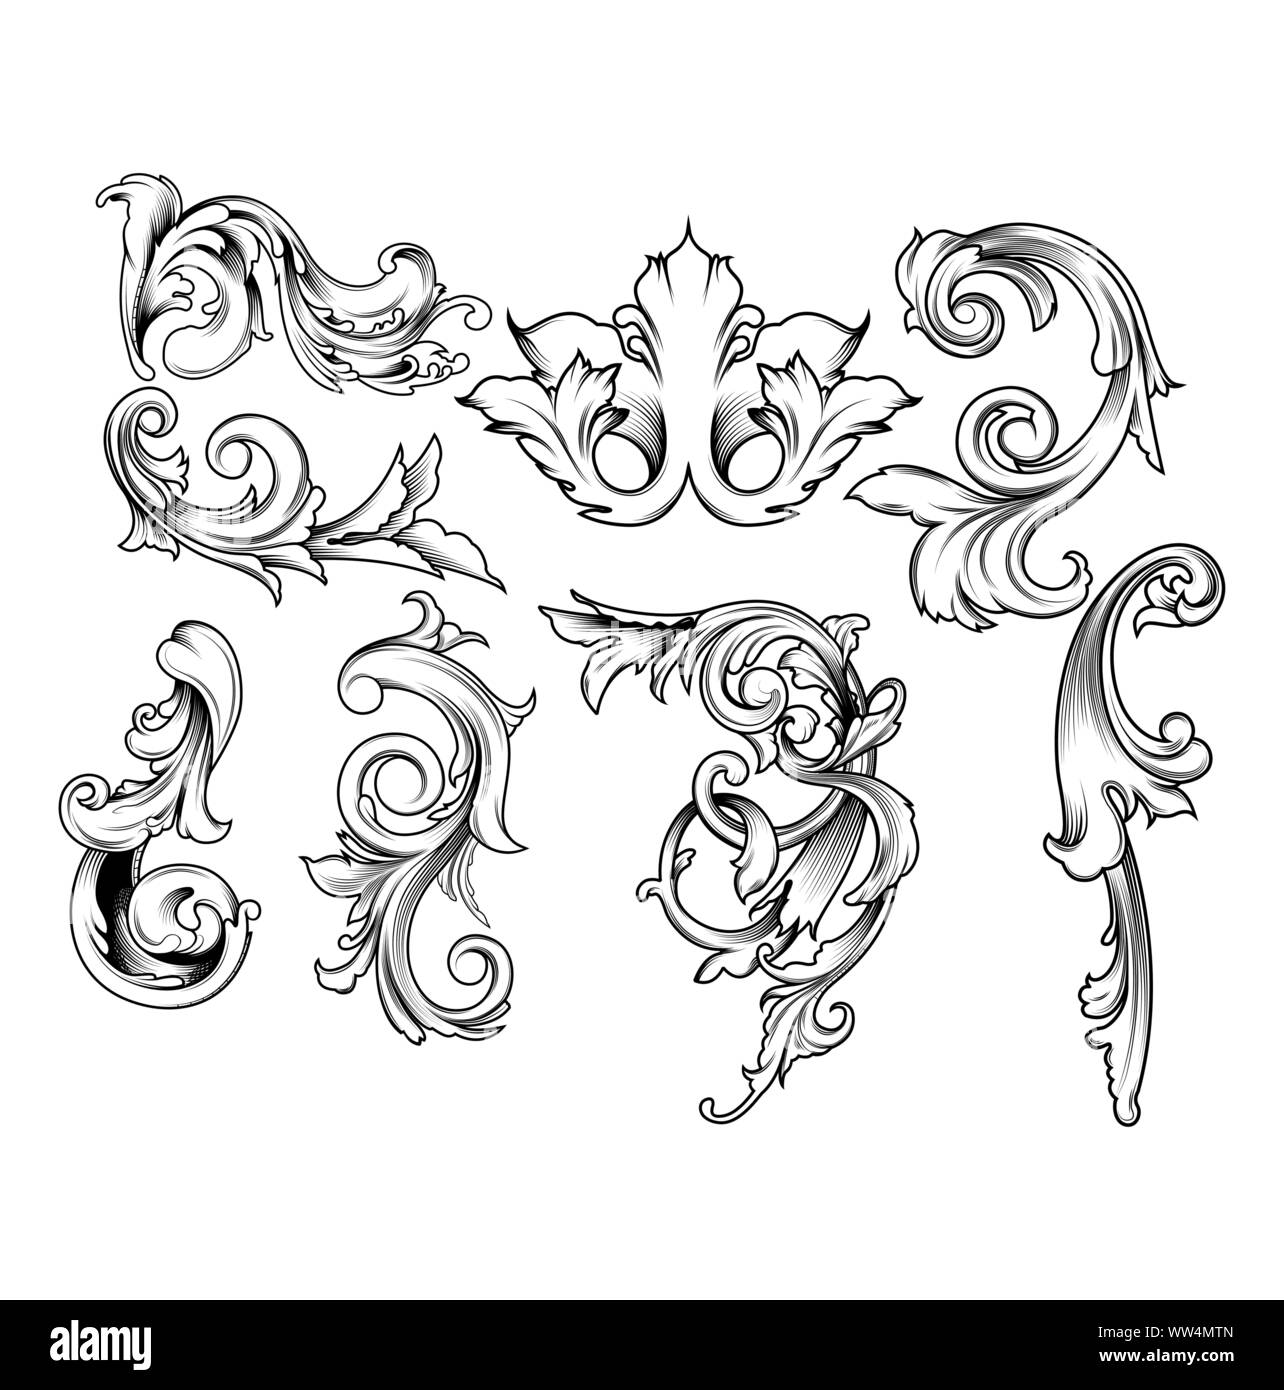 Design floral vector pack, Hand Drawn vintage floral elements. Swirls, laurels, frames, arrows, leaves, feathers, dividers, branches, banners and curl. Stock Vector